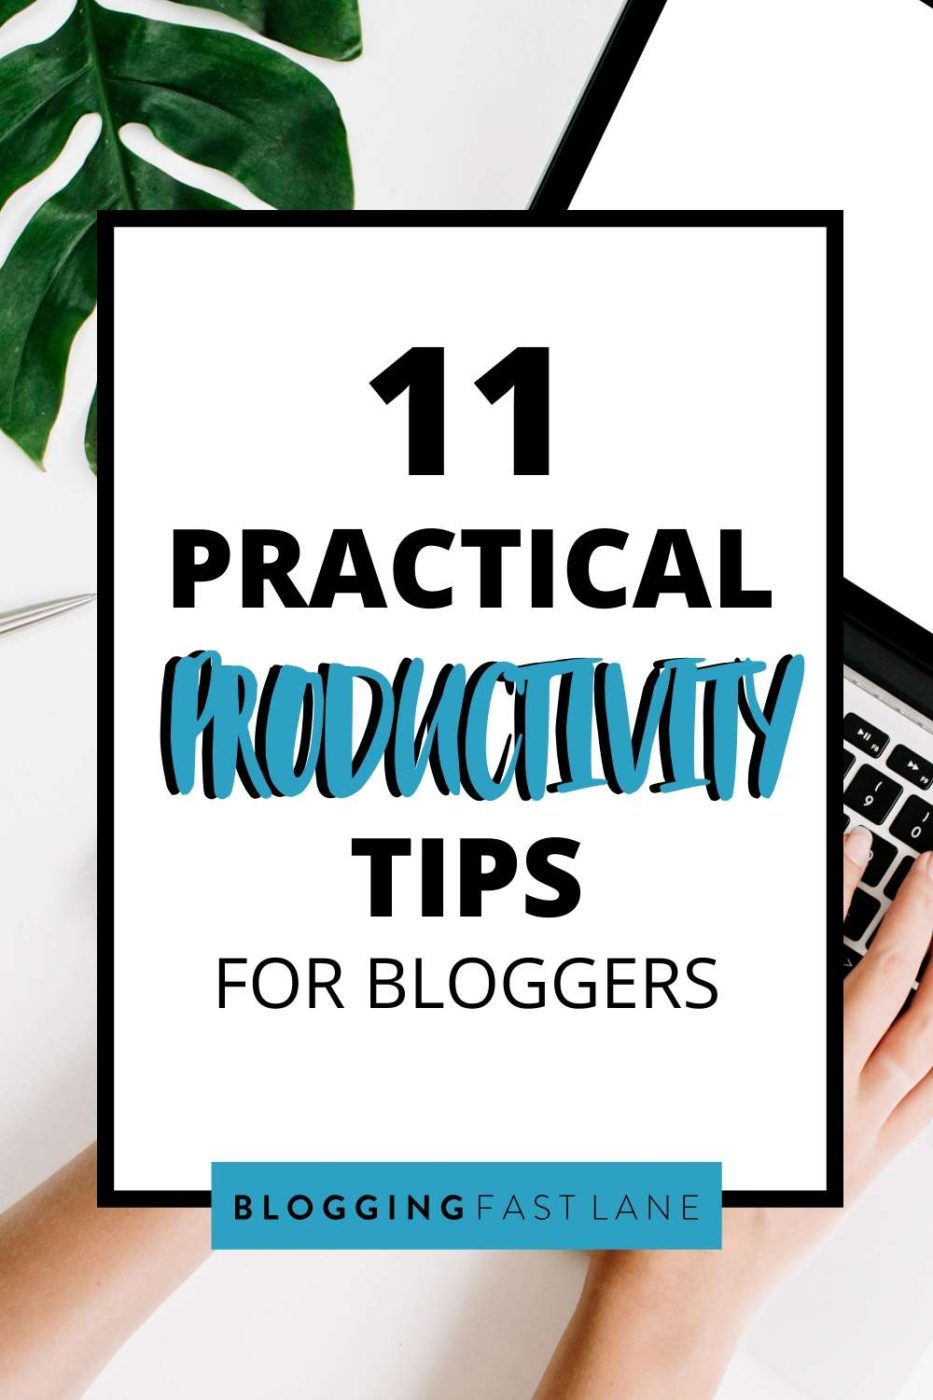 Top Productivity Tips for Bloggers | Make the most of your blogging time with these productivity tips!